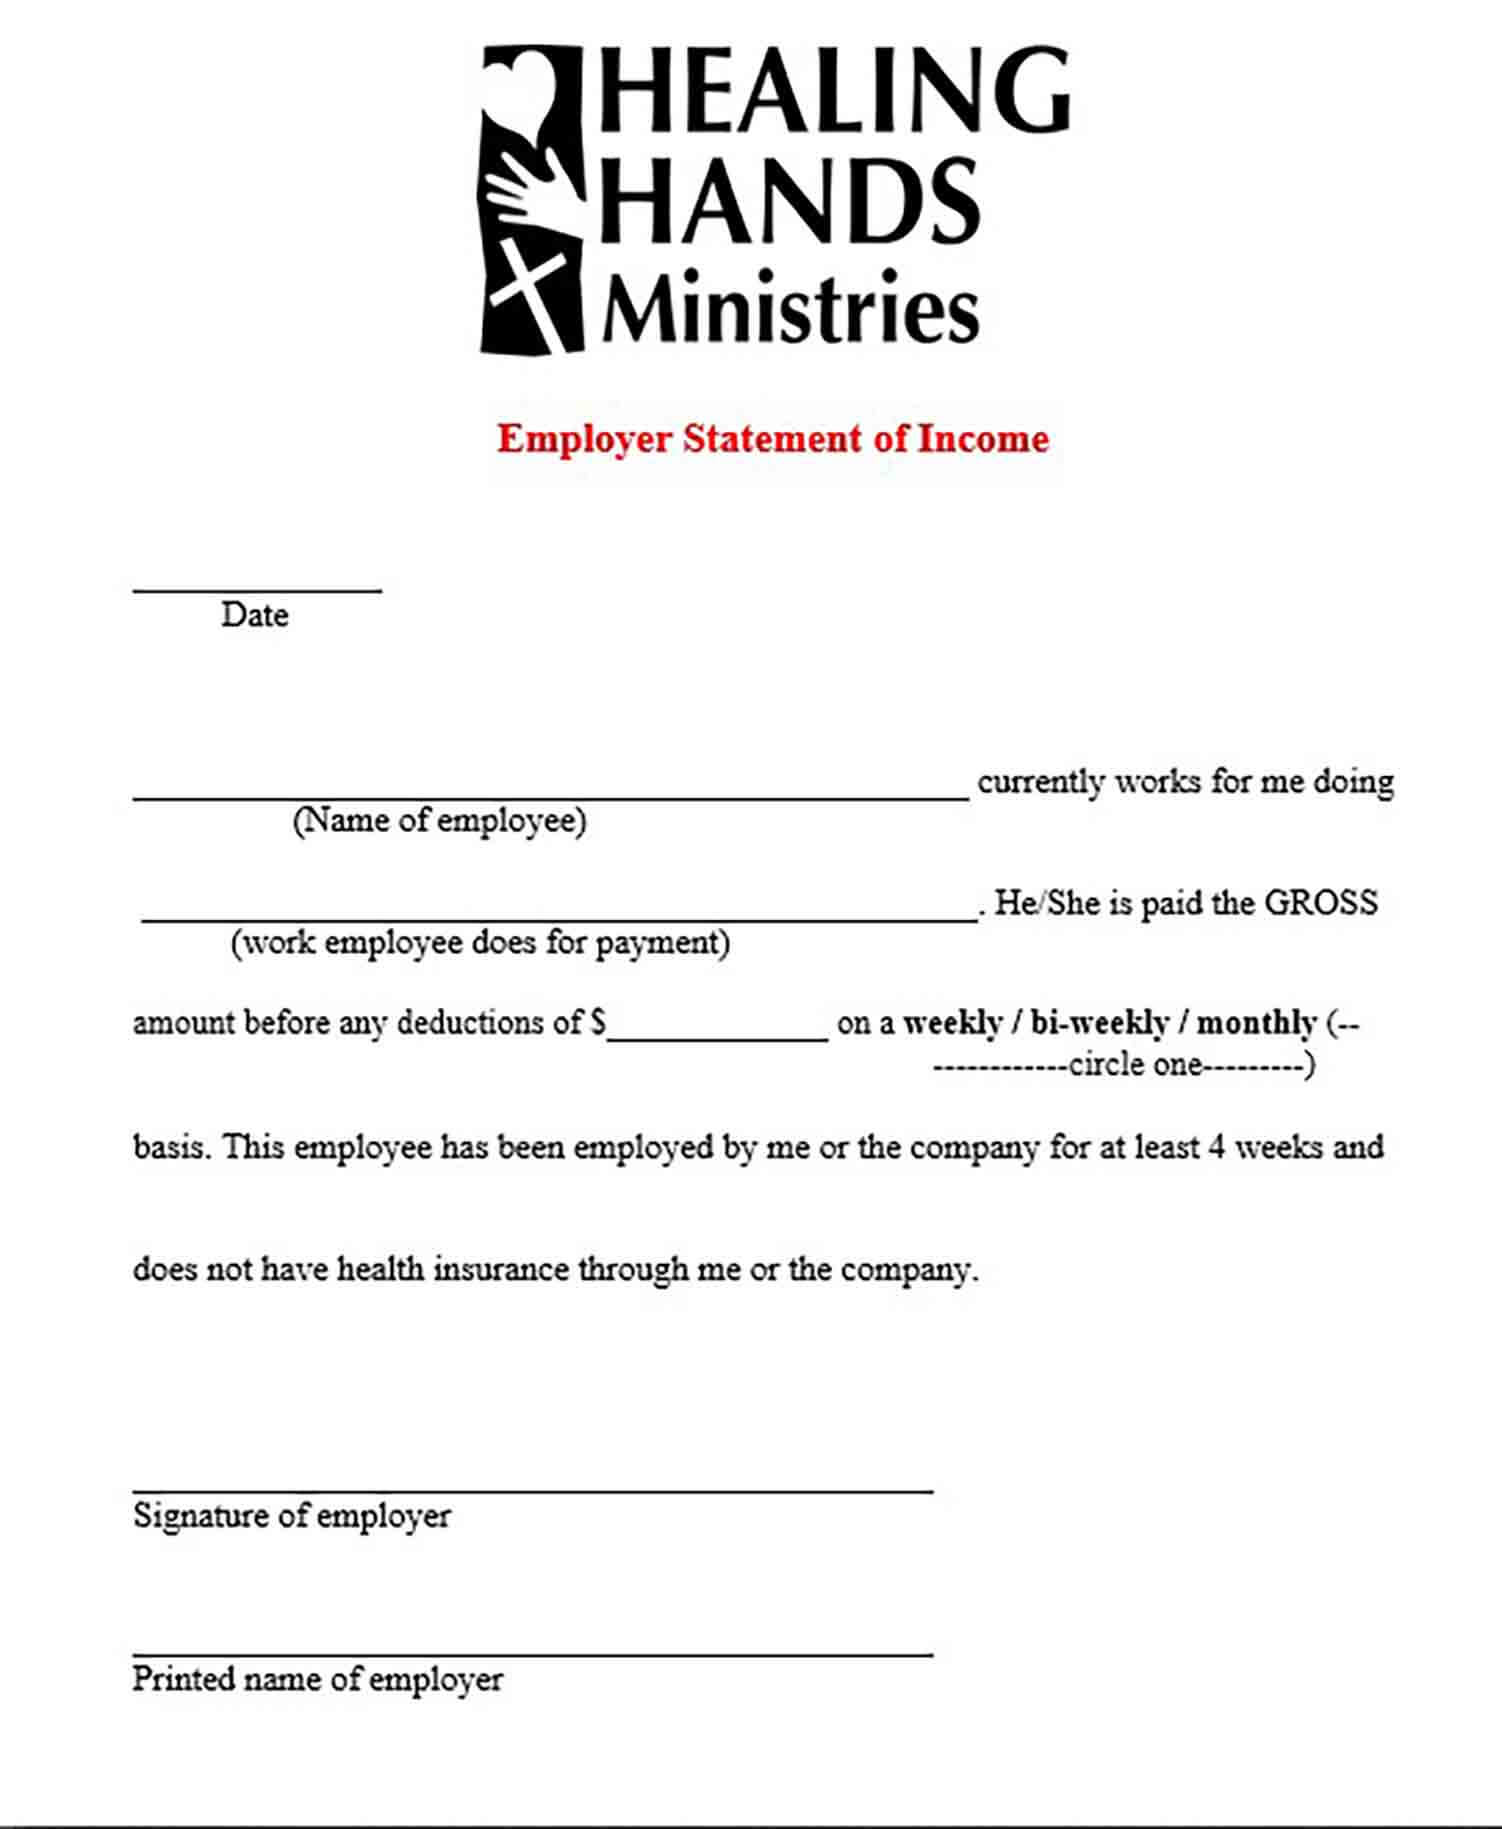 Proof of Income Letter templates